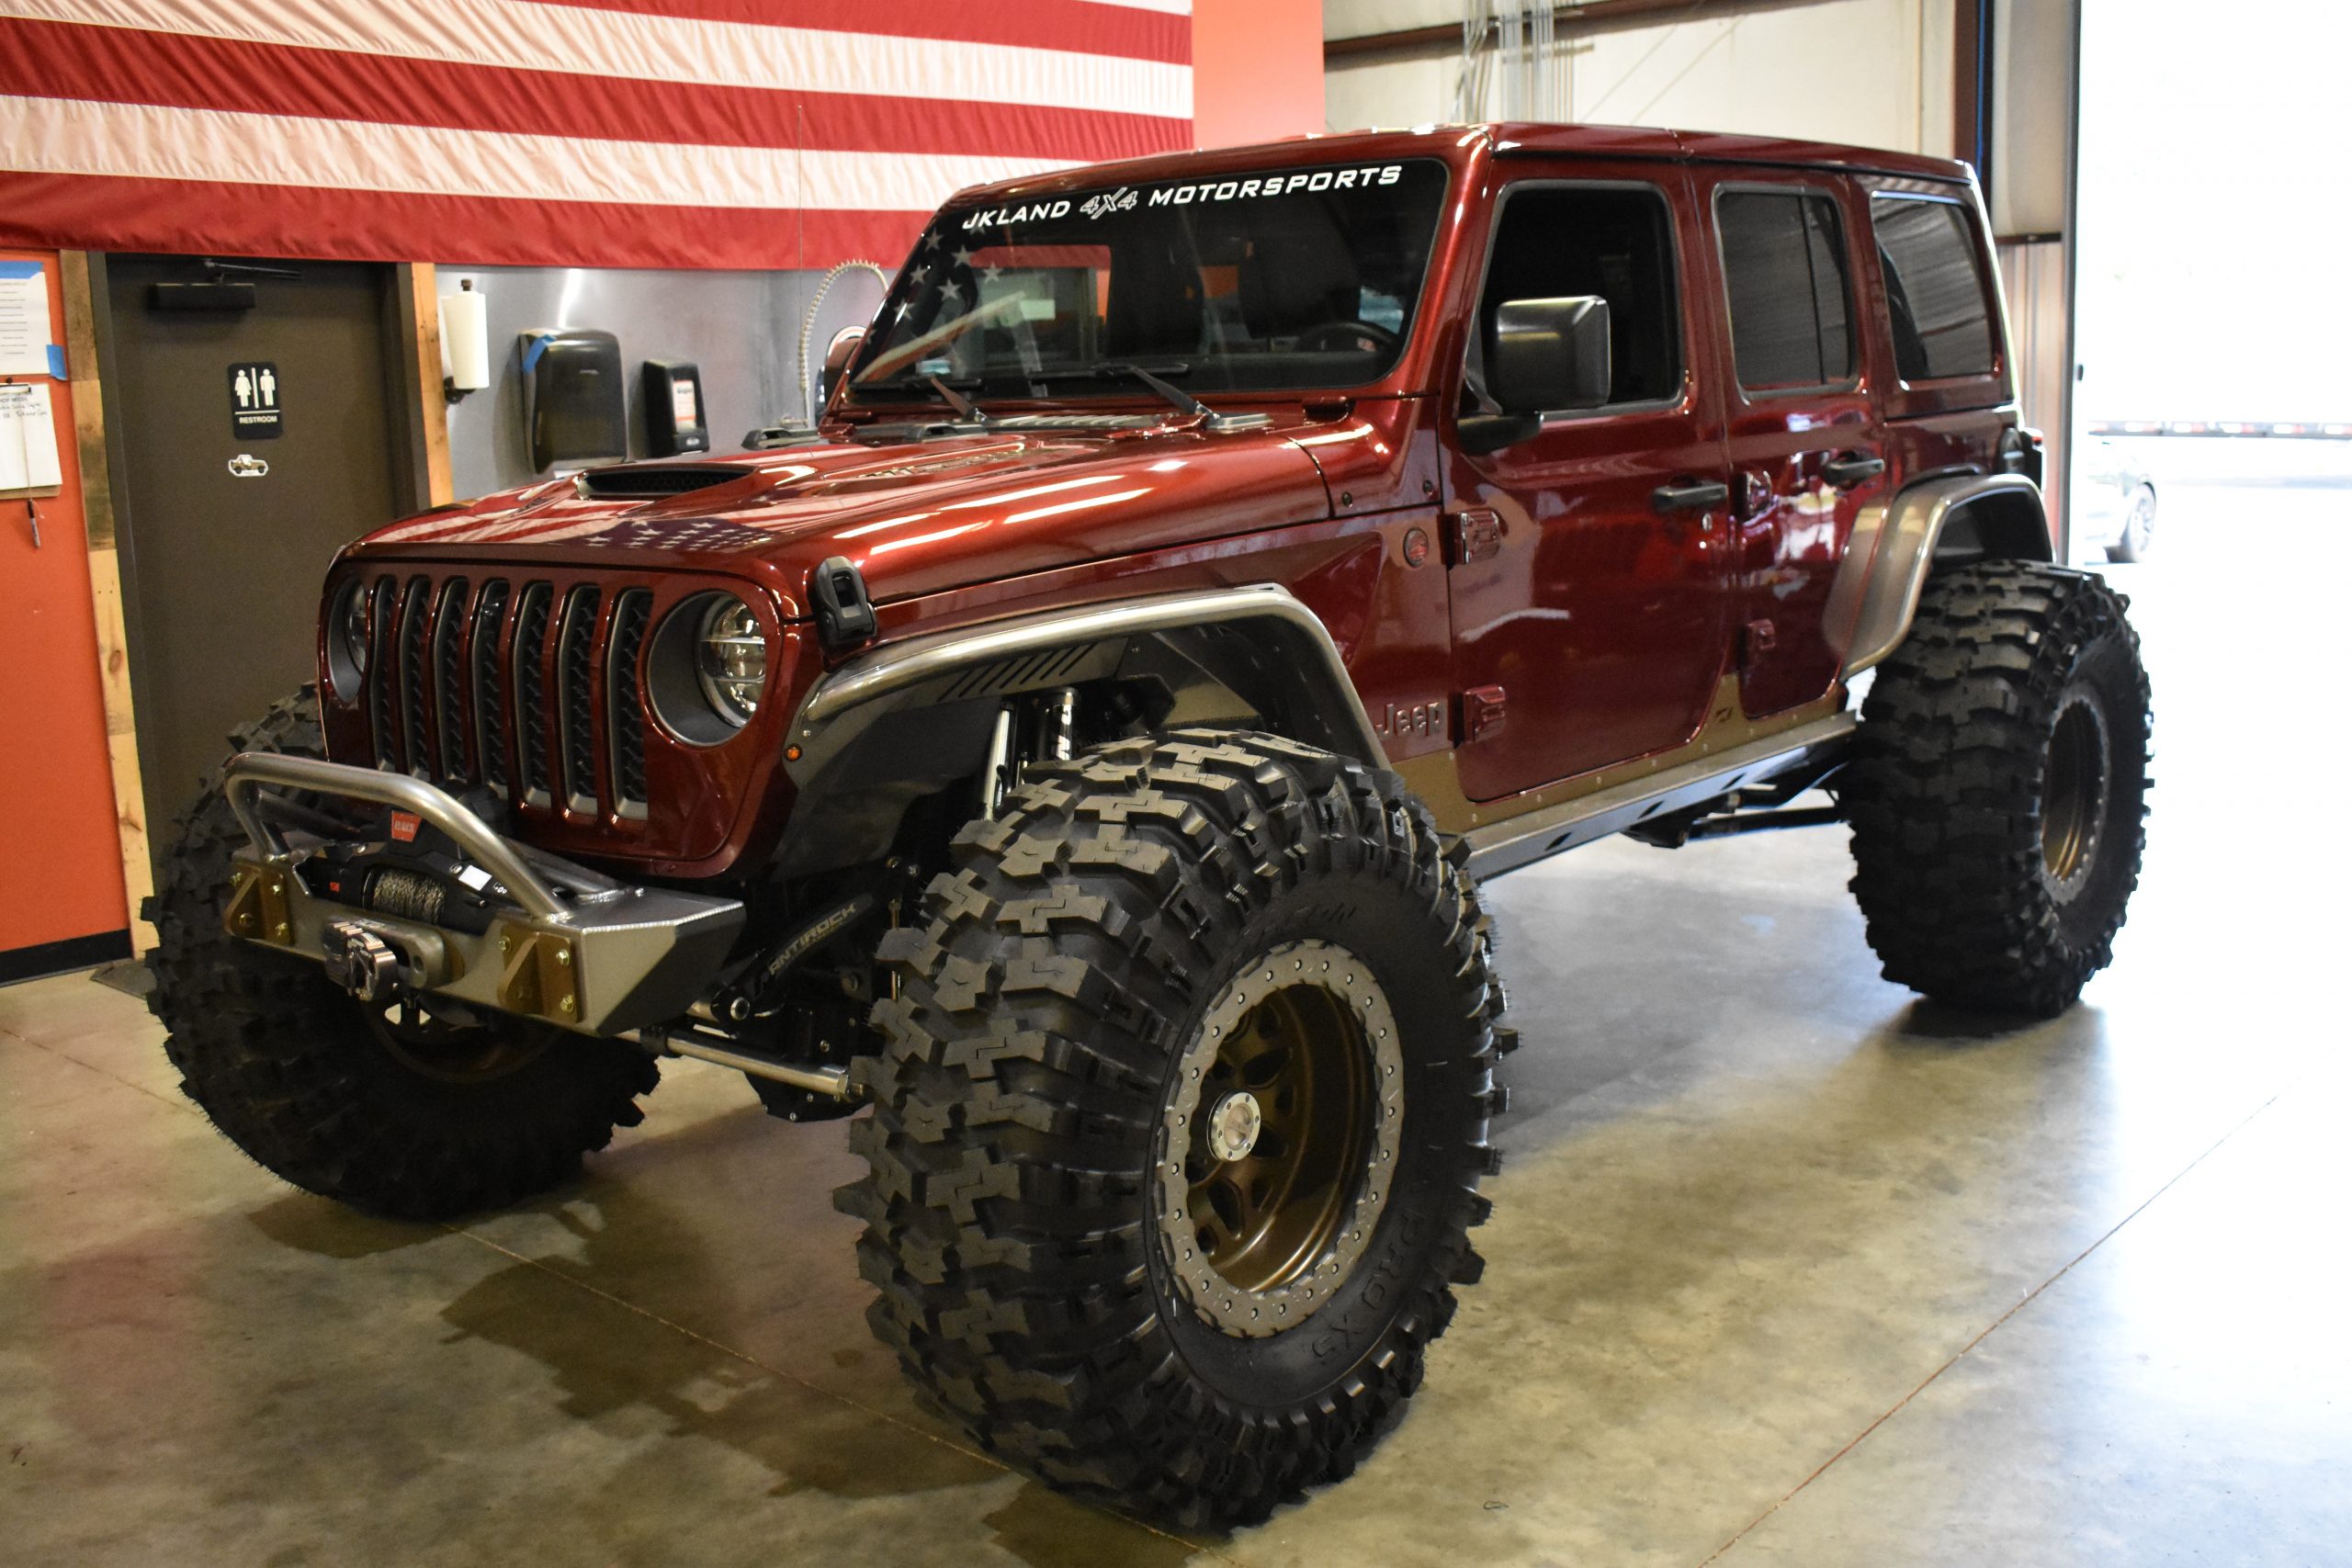 LS Conversions – JK Land Jeep Sales and Outfitters